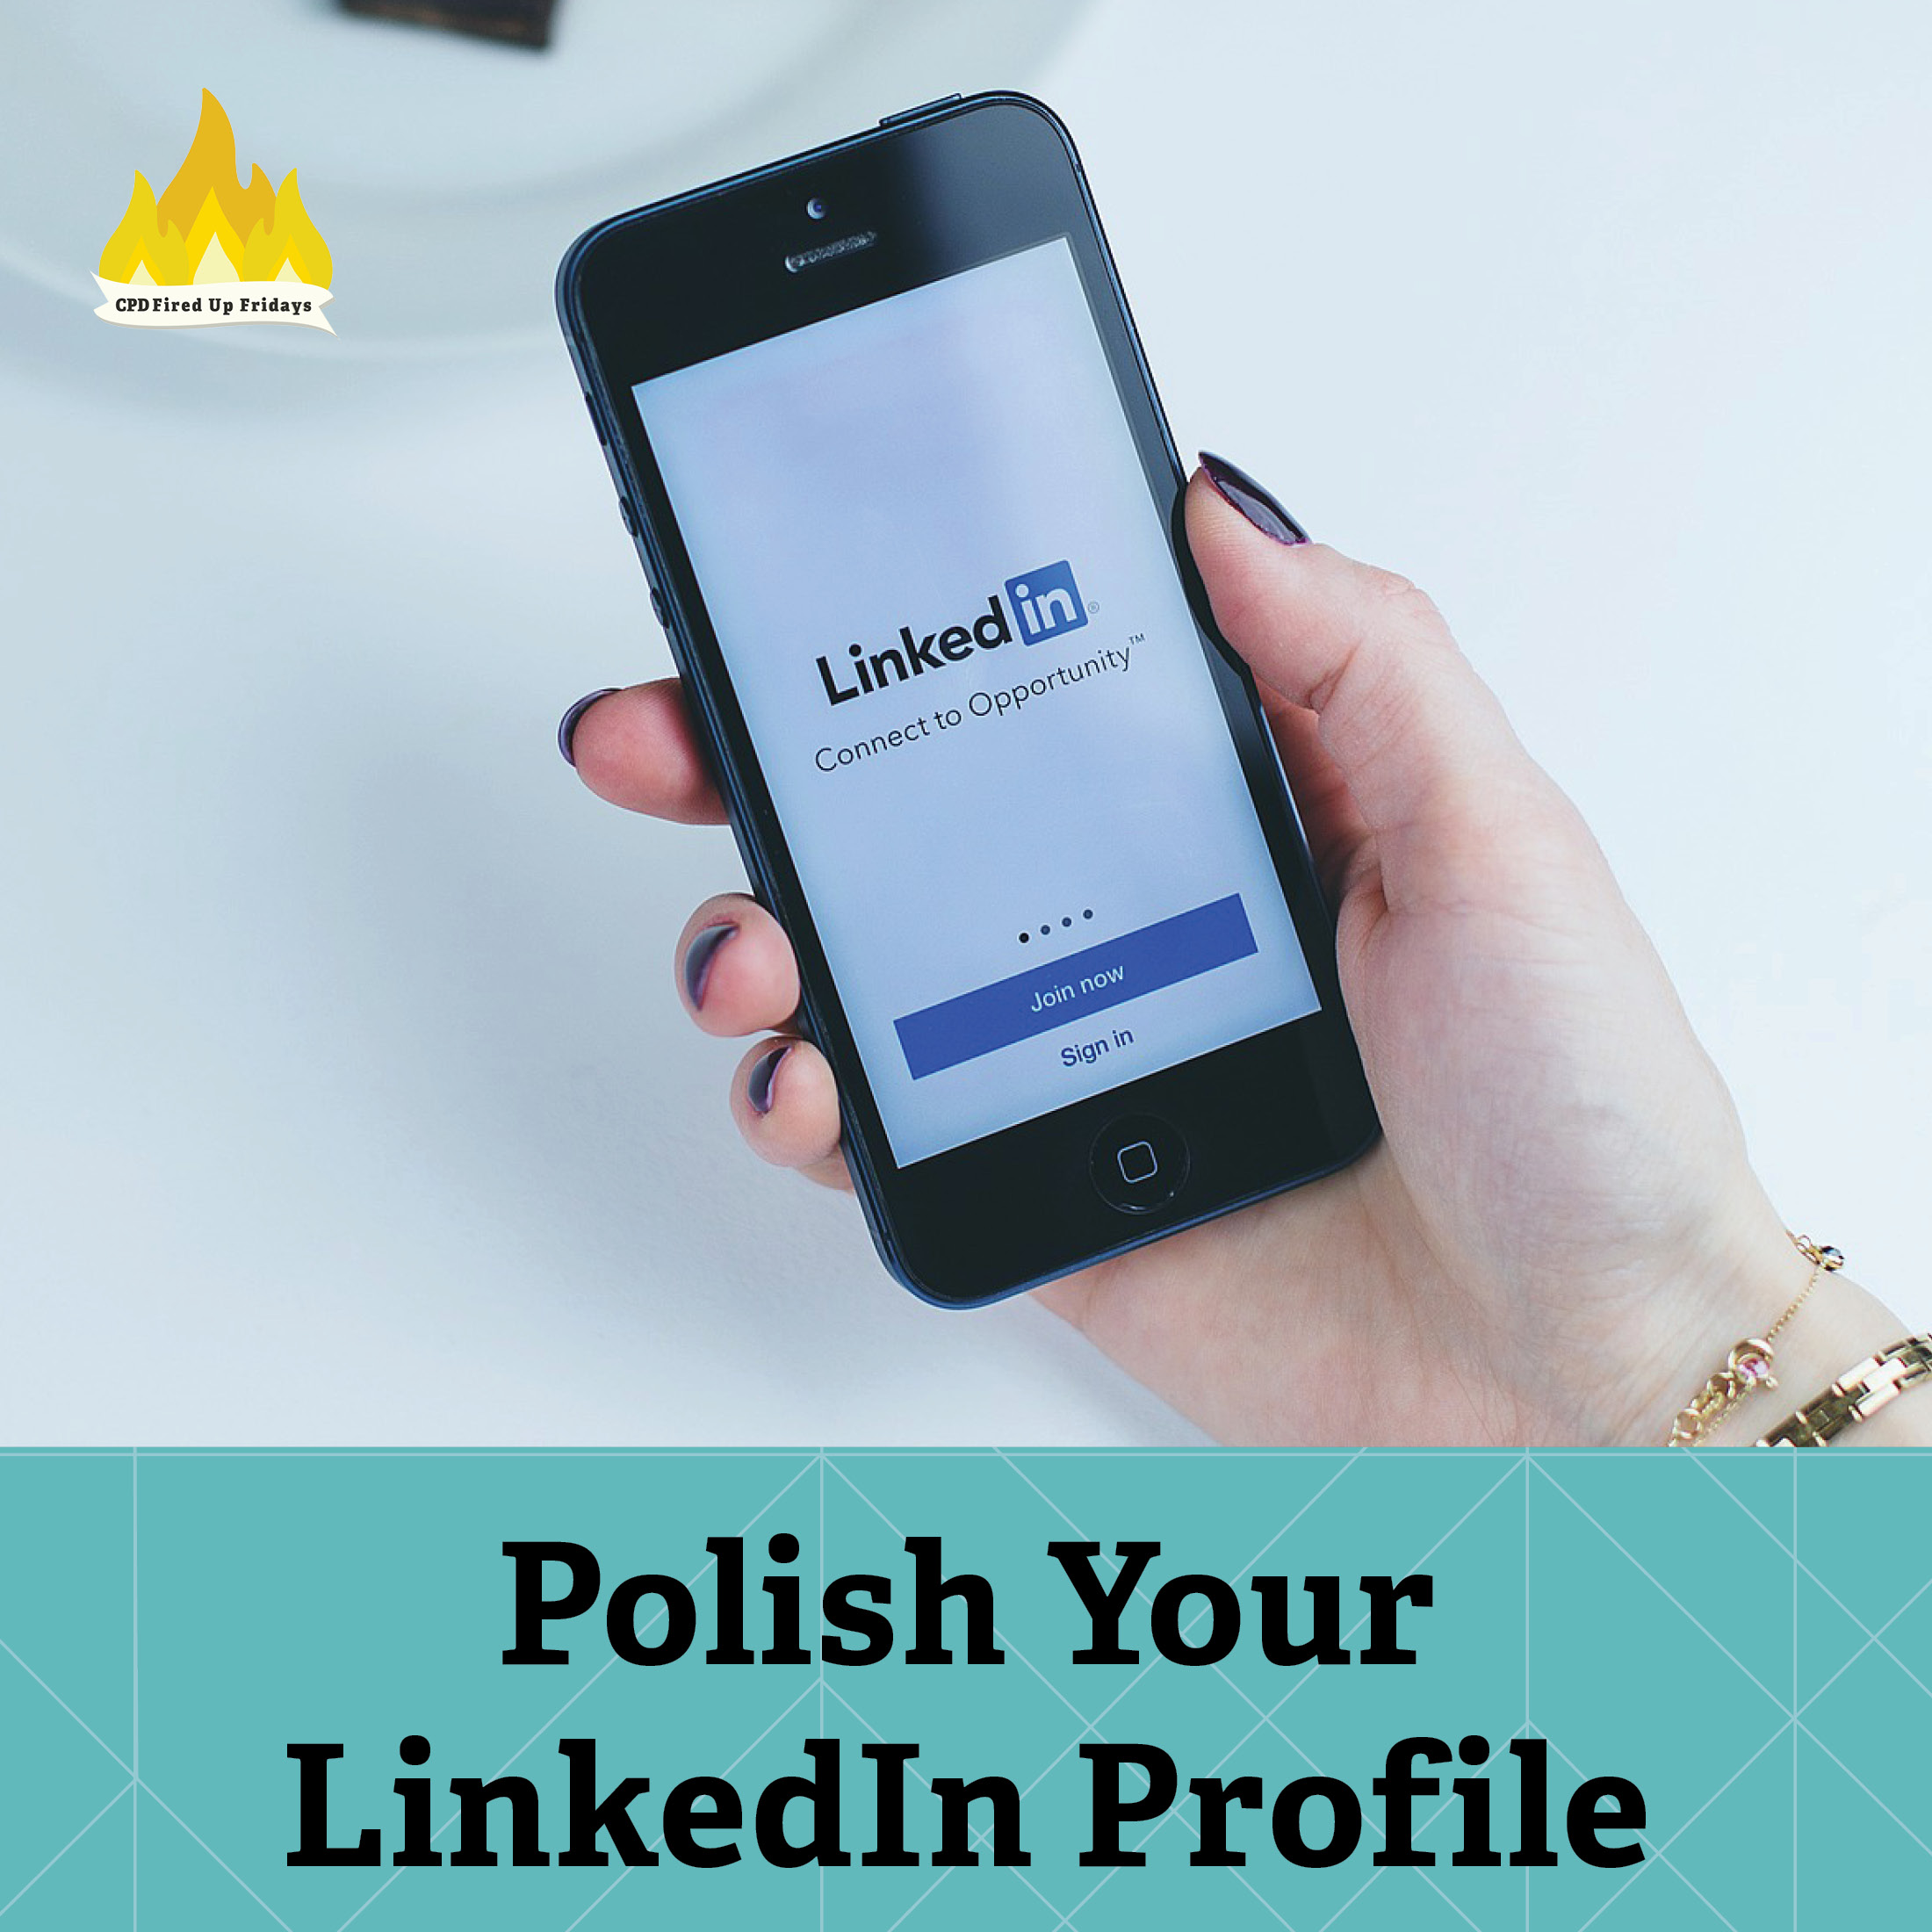 Photo of a hand holding a smart phone. The phone's screen is clearly visible with the LinkedIn logo and login button. Text underneath reads: 'Polish Your LinkedIn Profile.'